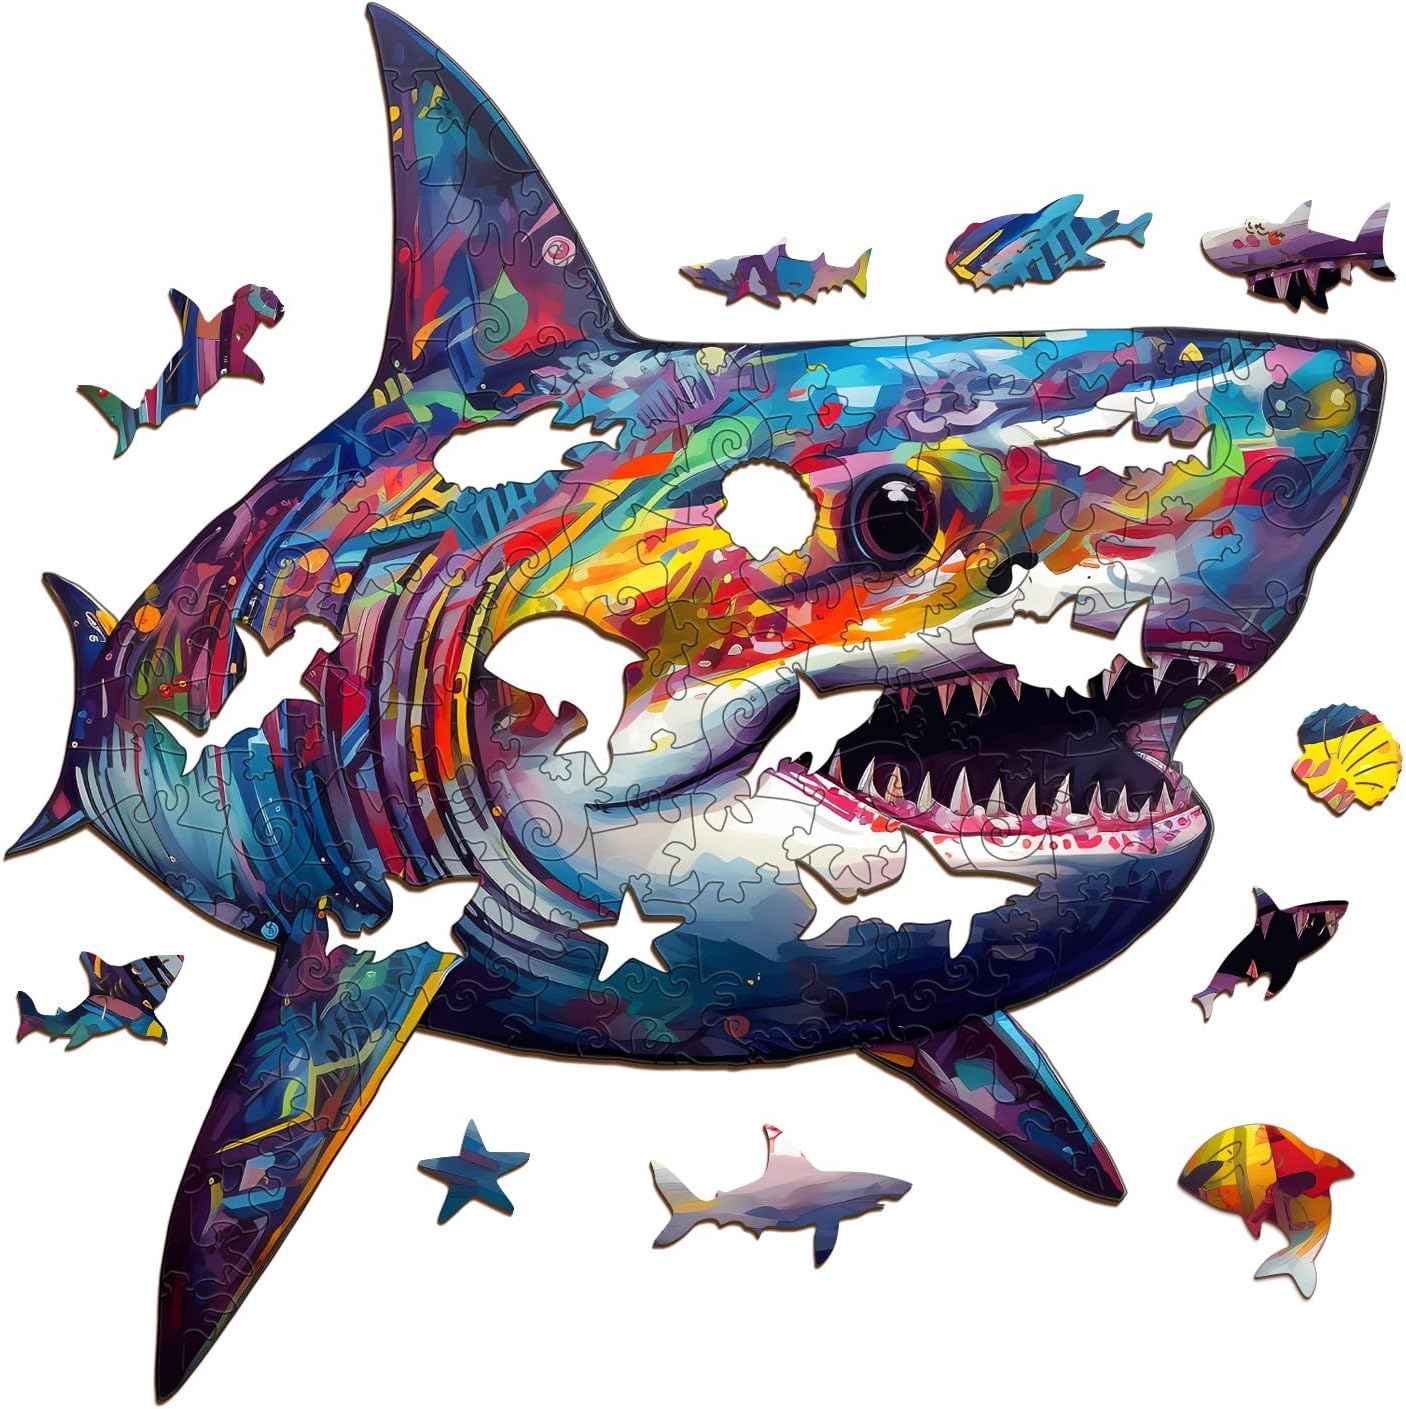 Wooden Jigsaw Puzzles-Wooden Puzzle Adult Unique Shape Advanced Colored Shark Wooden Jigsaw Puzzle for Adult, Family Puzzles 12 * 11.8in 190pcs